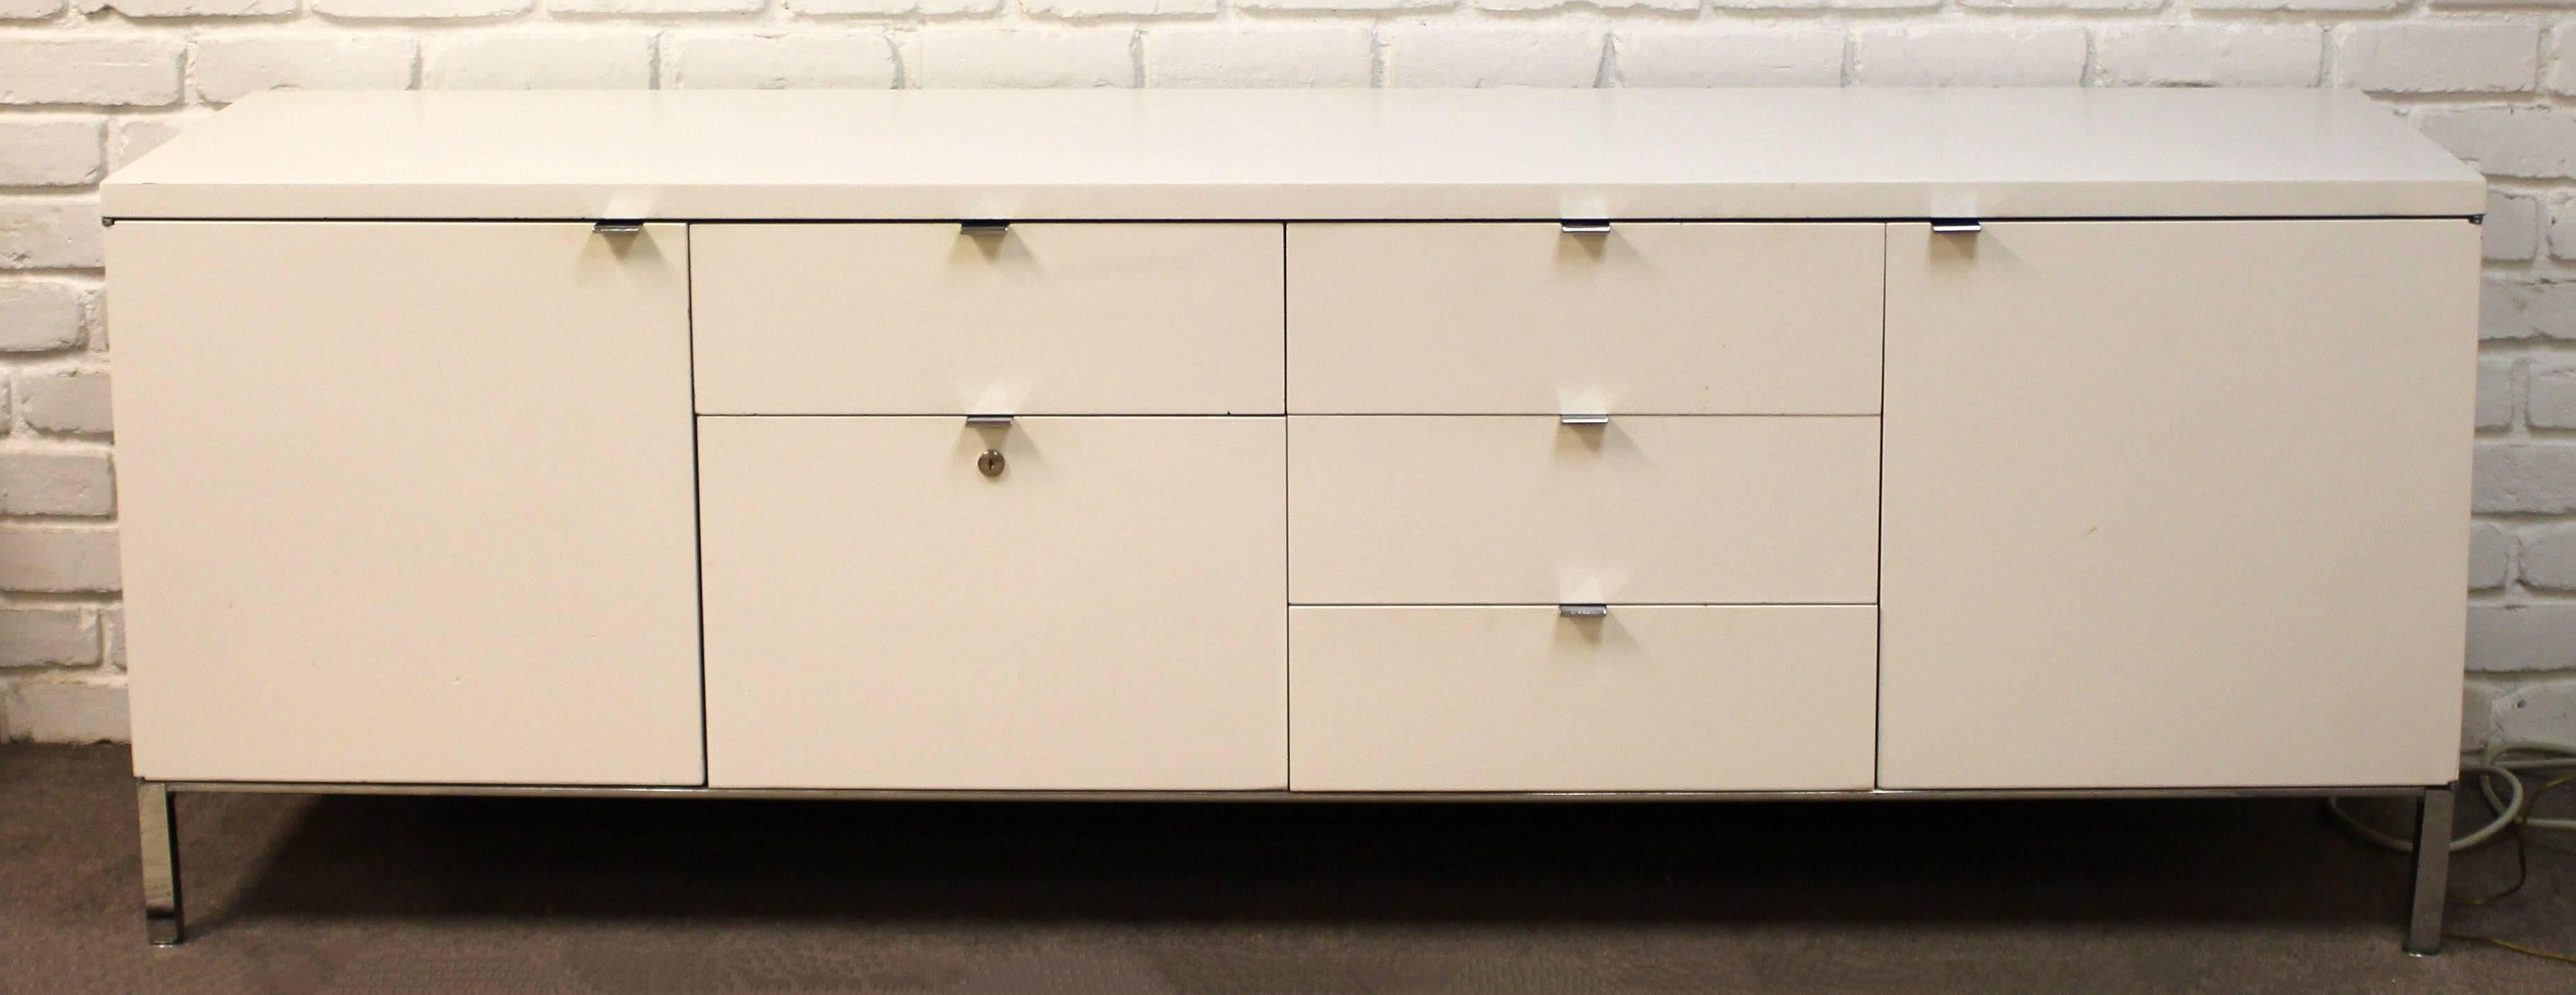 For your consideration is a marvellous, white credenza, with chrome legs and pulls, five drawers and two shelves, by Stow Davis. In great condition. The dimensions are 76